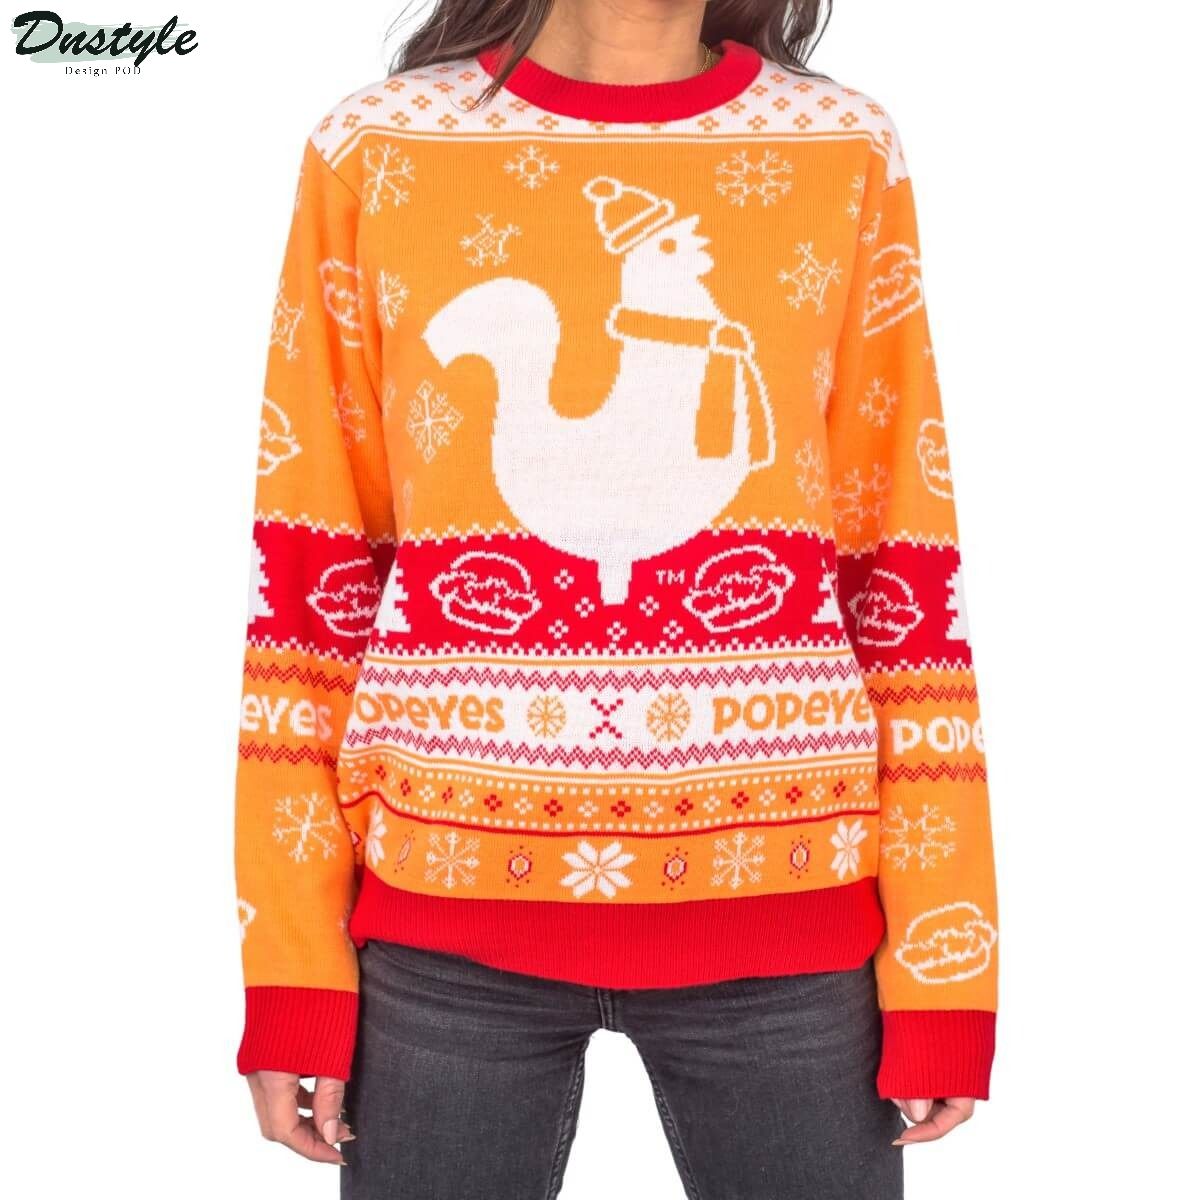 Popeyes ugly christmas sweater 1